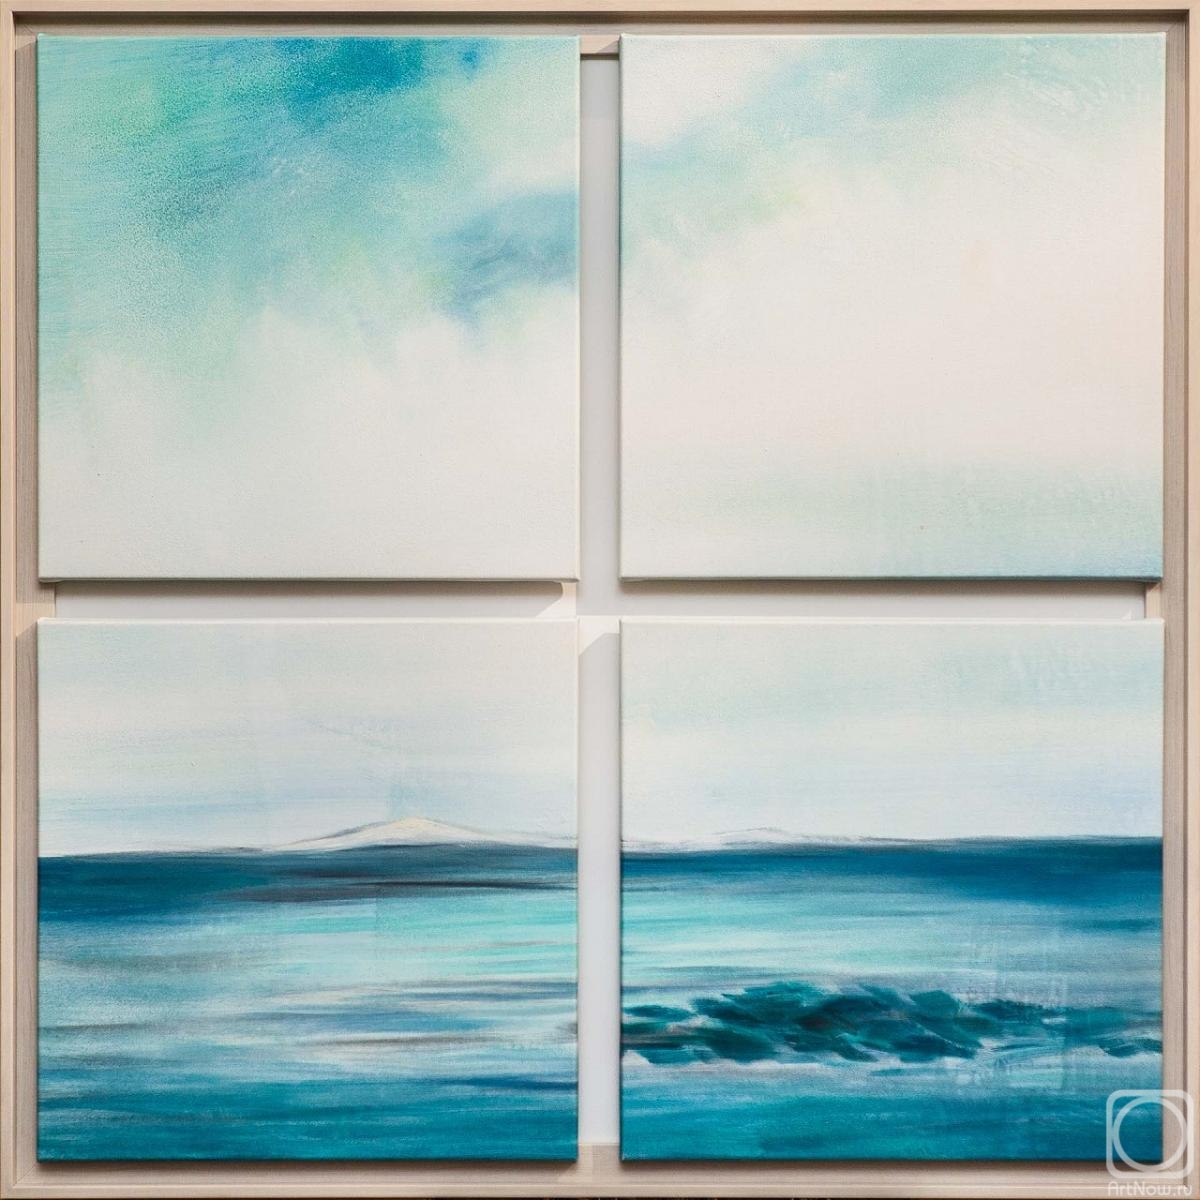 Dupree Brian. In the blue and distant ocean (polyptych)